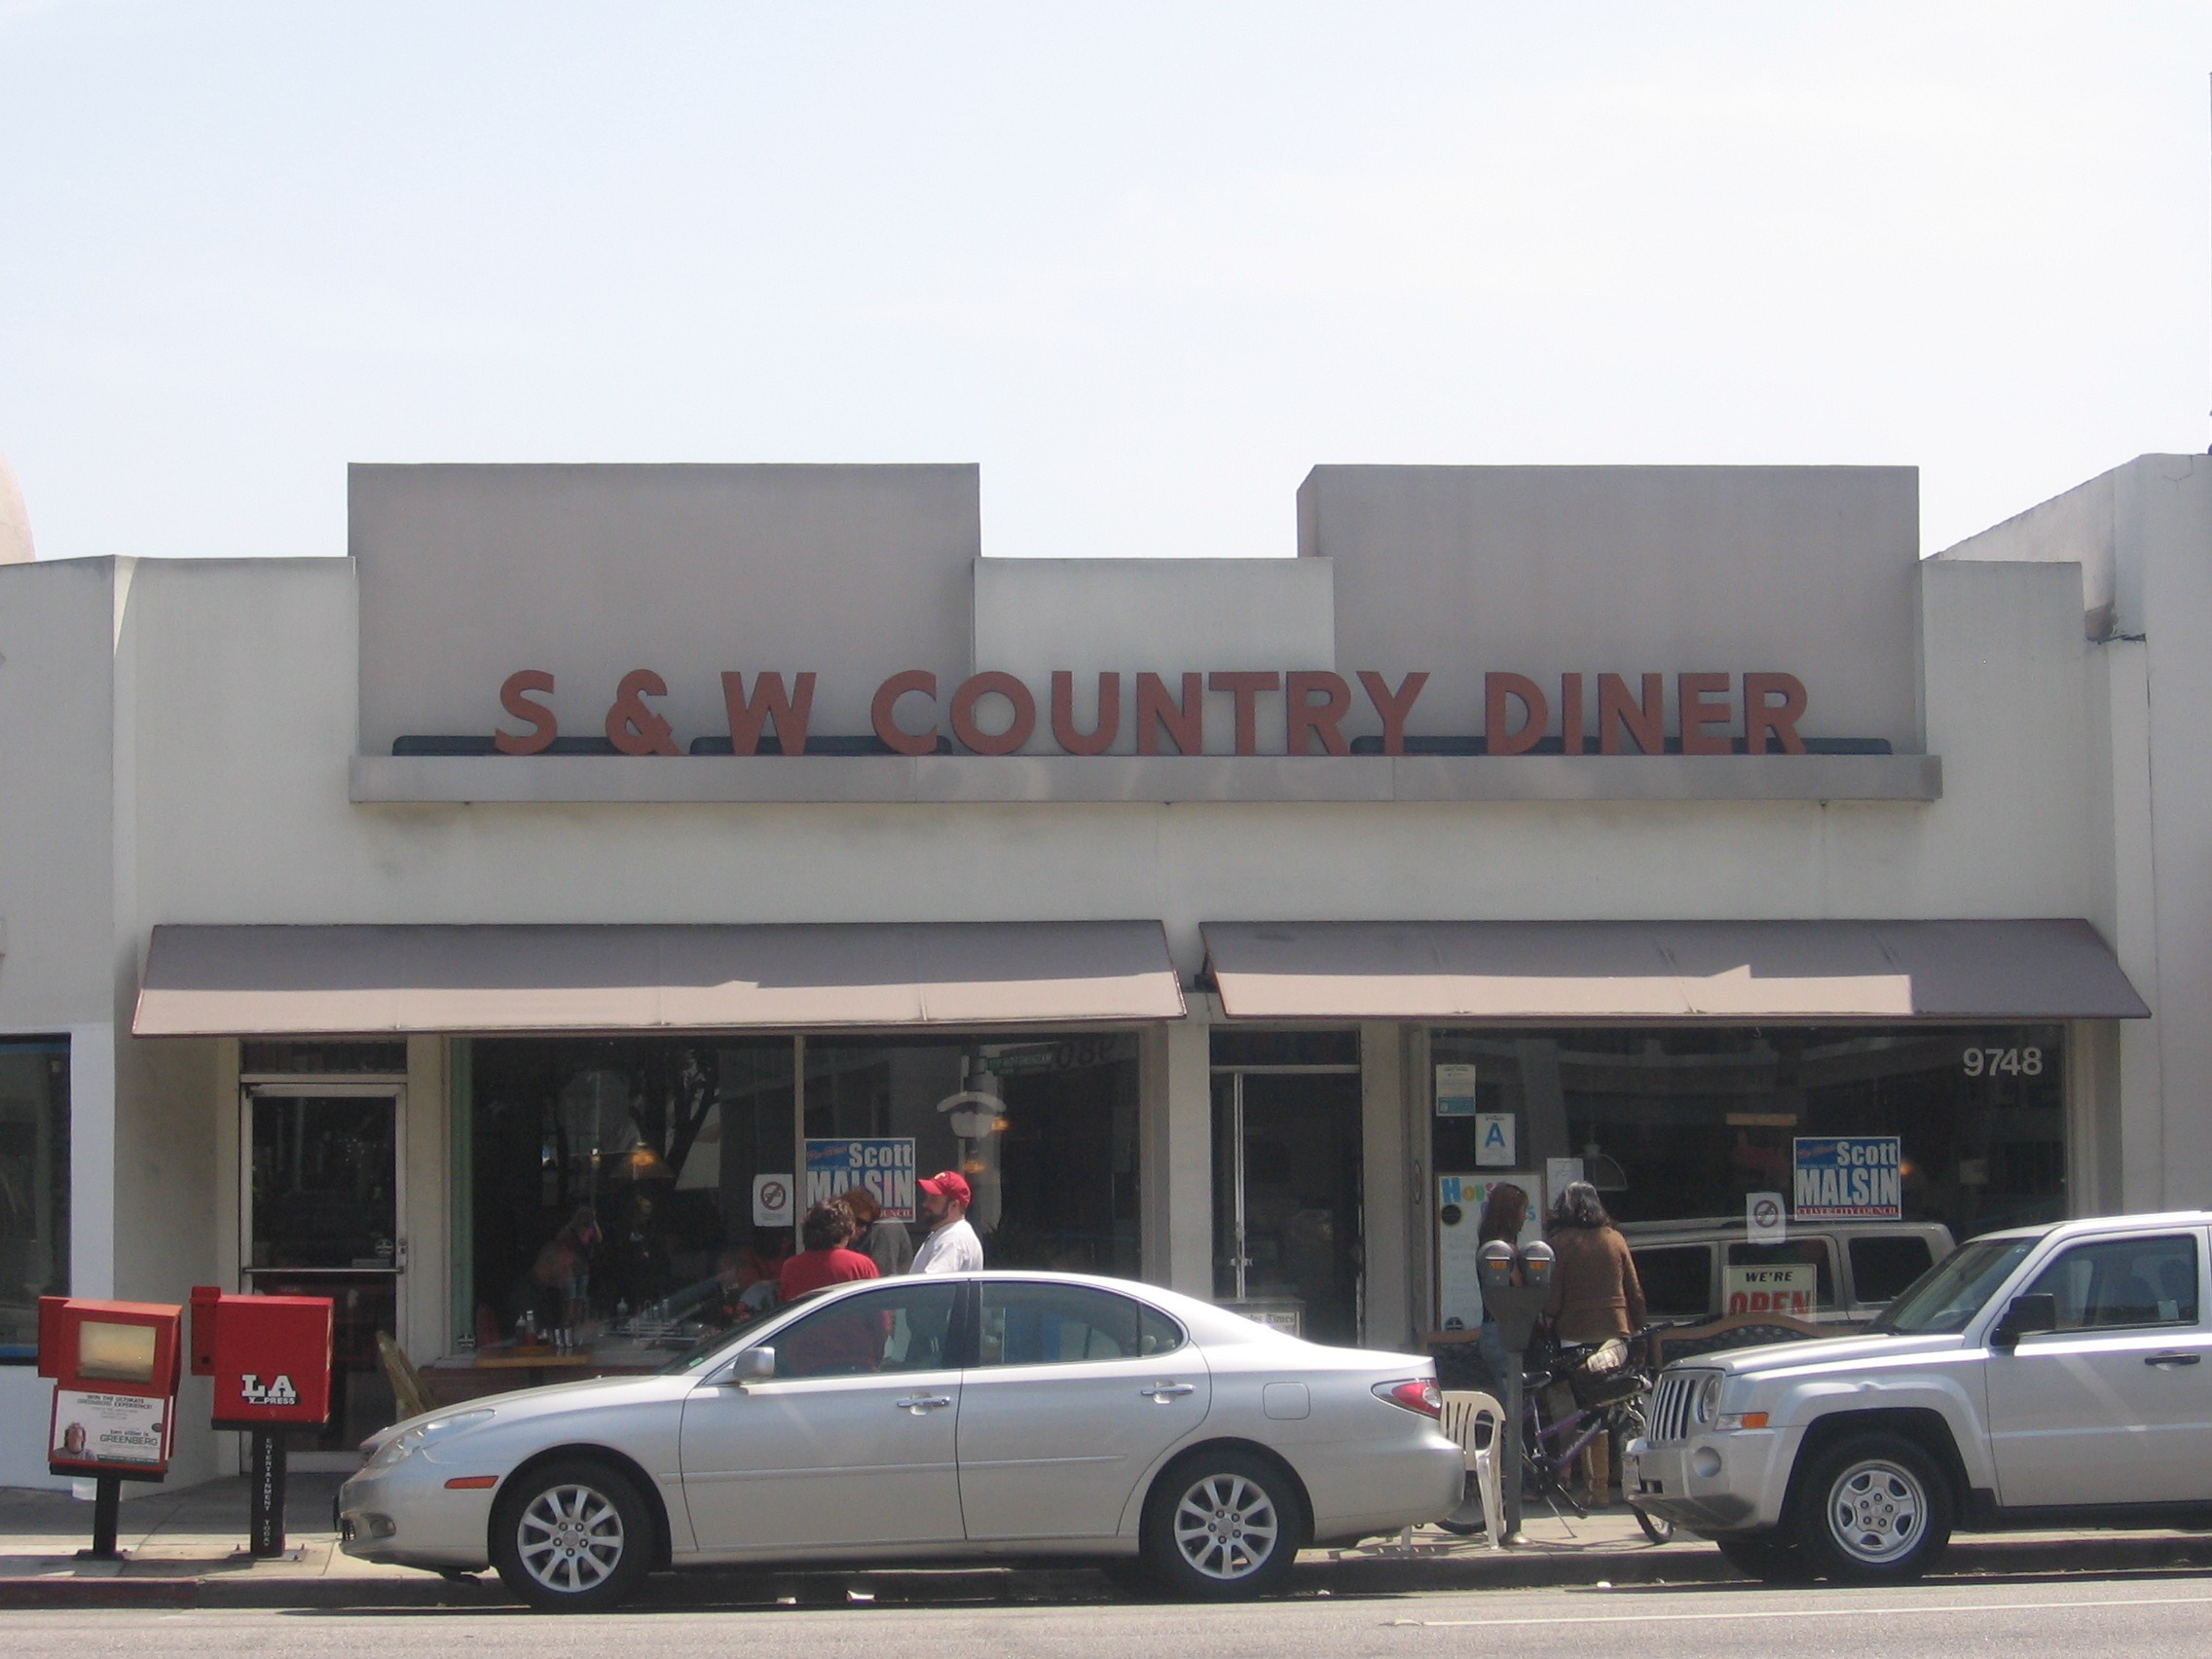 S&W Country Diner